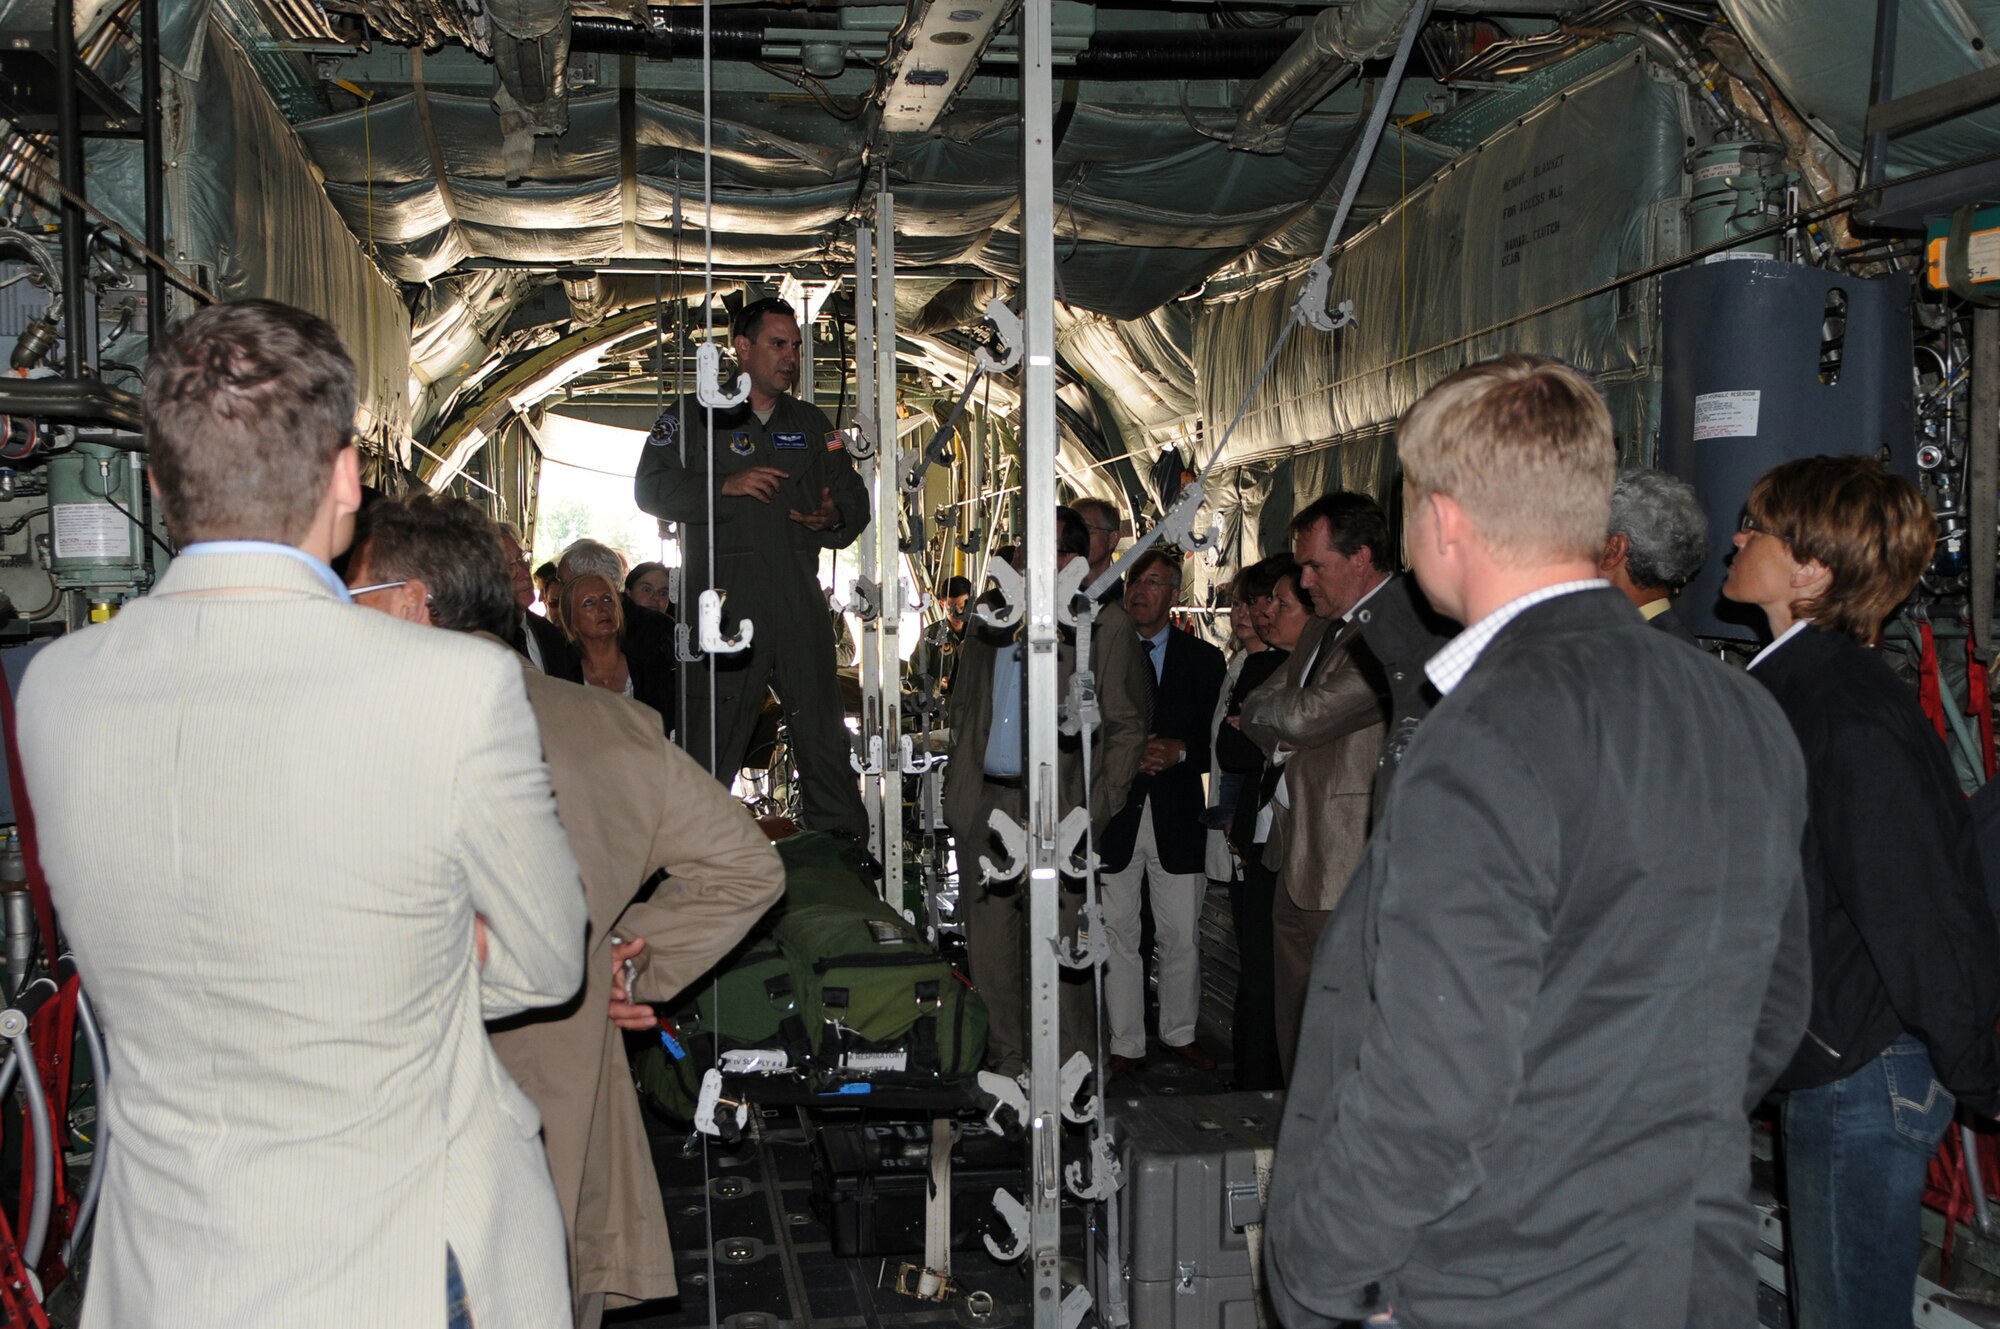 TRICARE-Europe Preferred Provider Network (PPN) host nation providers tour a C-130 and various medical facilities they help support on Ramstein Air Base, Germany, June 4, 2009.  The PPN helps military members and their families with health care needs overseas. (U.S. Air Force photo by Airman 1st Class Caleb Pierce)